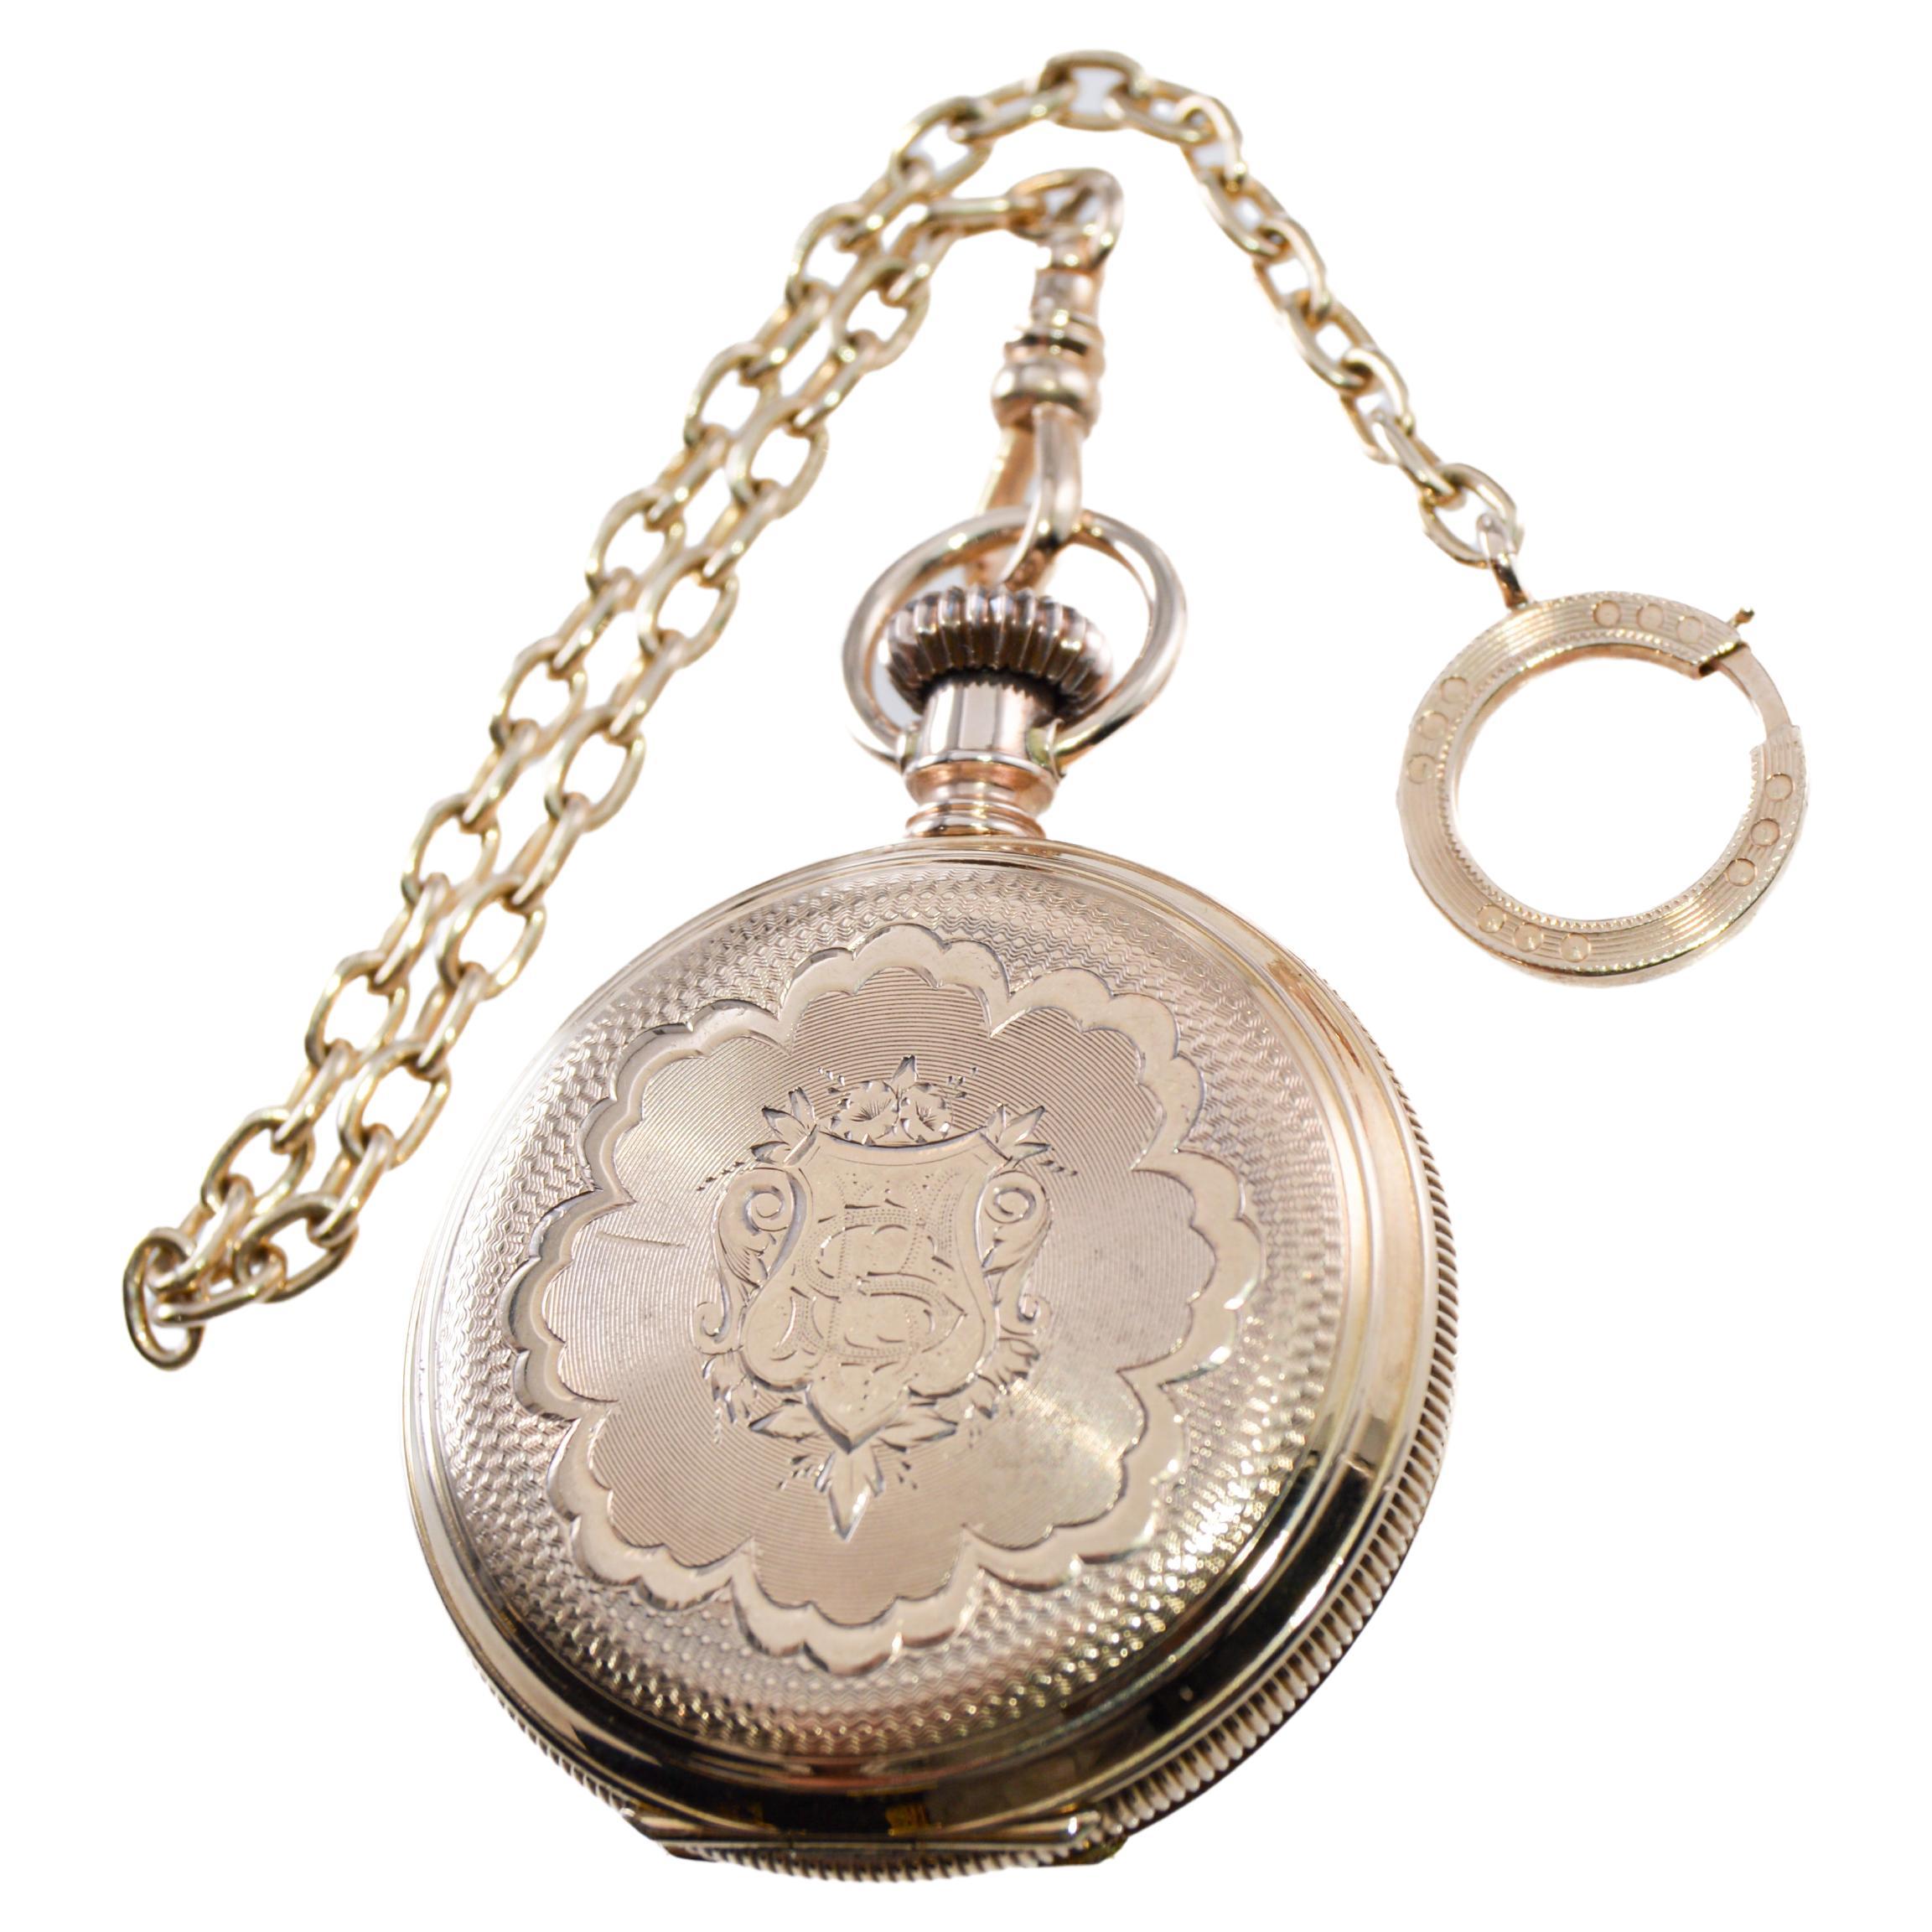 FACTORY / HOUSE: Elgin Watch Company
STYLE / REFERENCE: Hunters Case Pocket Watch
METAL / MATERIAL: 14Kt. Solid Gold / Supplied with a Solid Gold Pocket Watch Chain
CIRCA / YEAR: 1887
DIMENSIONS / SIZE: Length & Diameter 40mm
MOVEMENT / CALIBER: